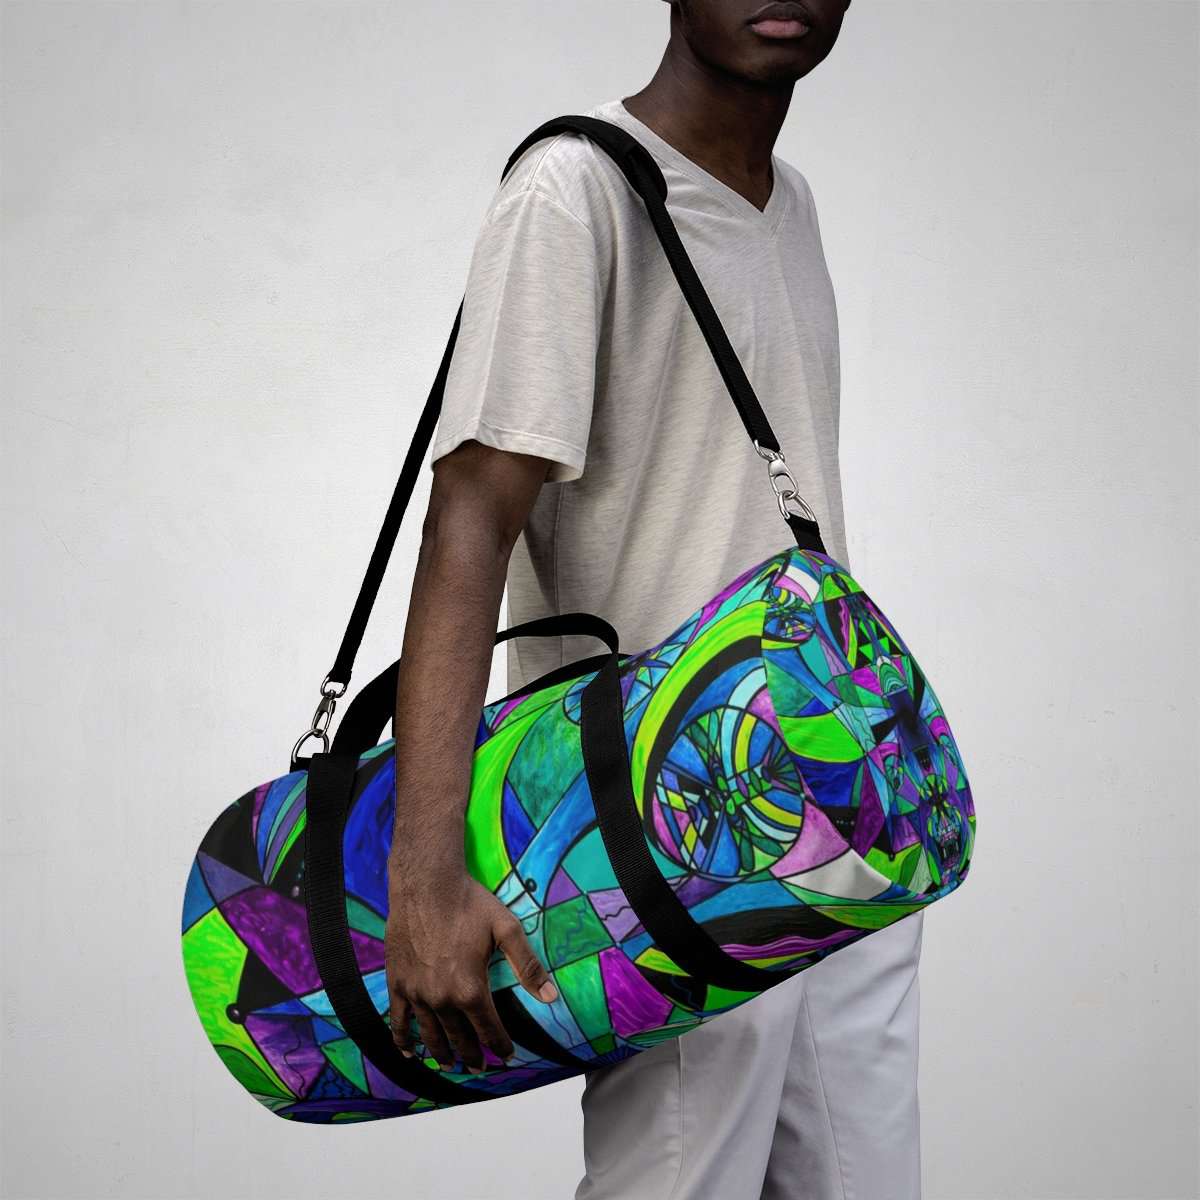 shop-online-and-get-your-favourite-arcturian-astral-travel-grid-duffle-bag-online_11.jpg